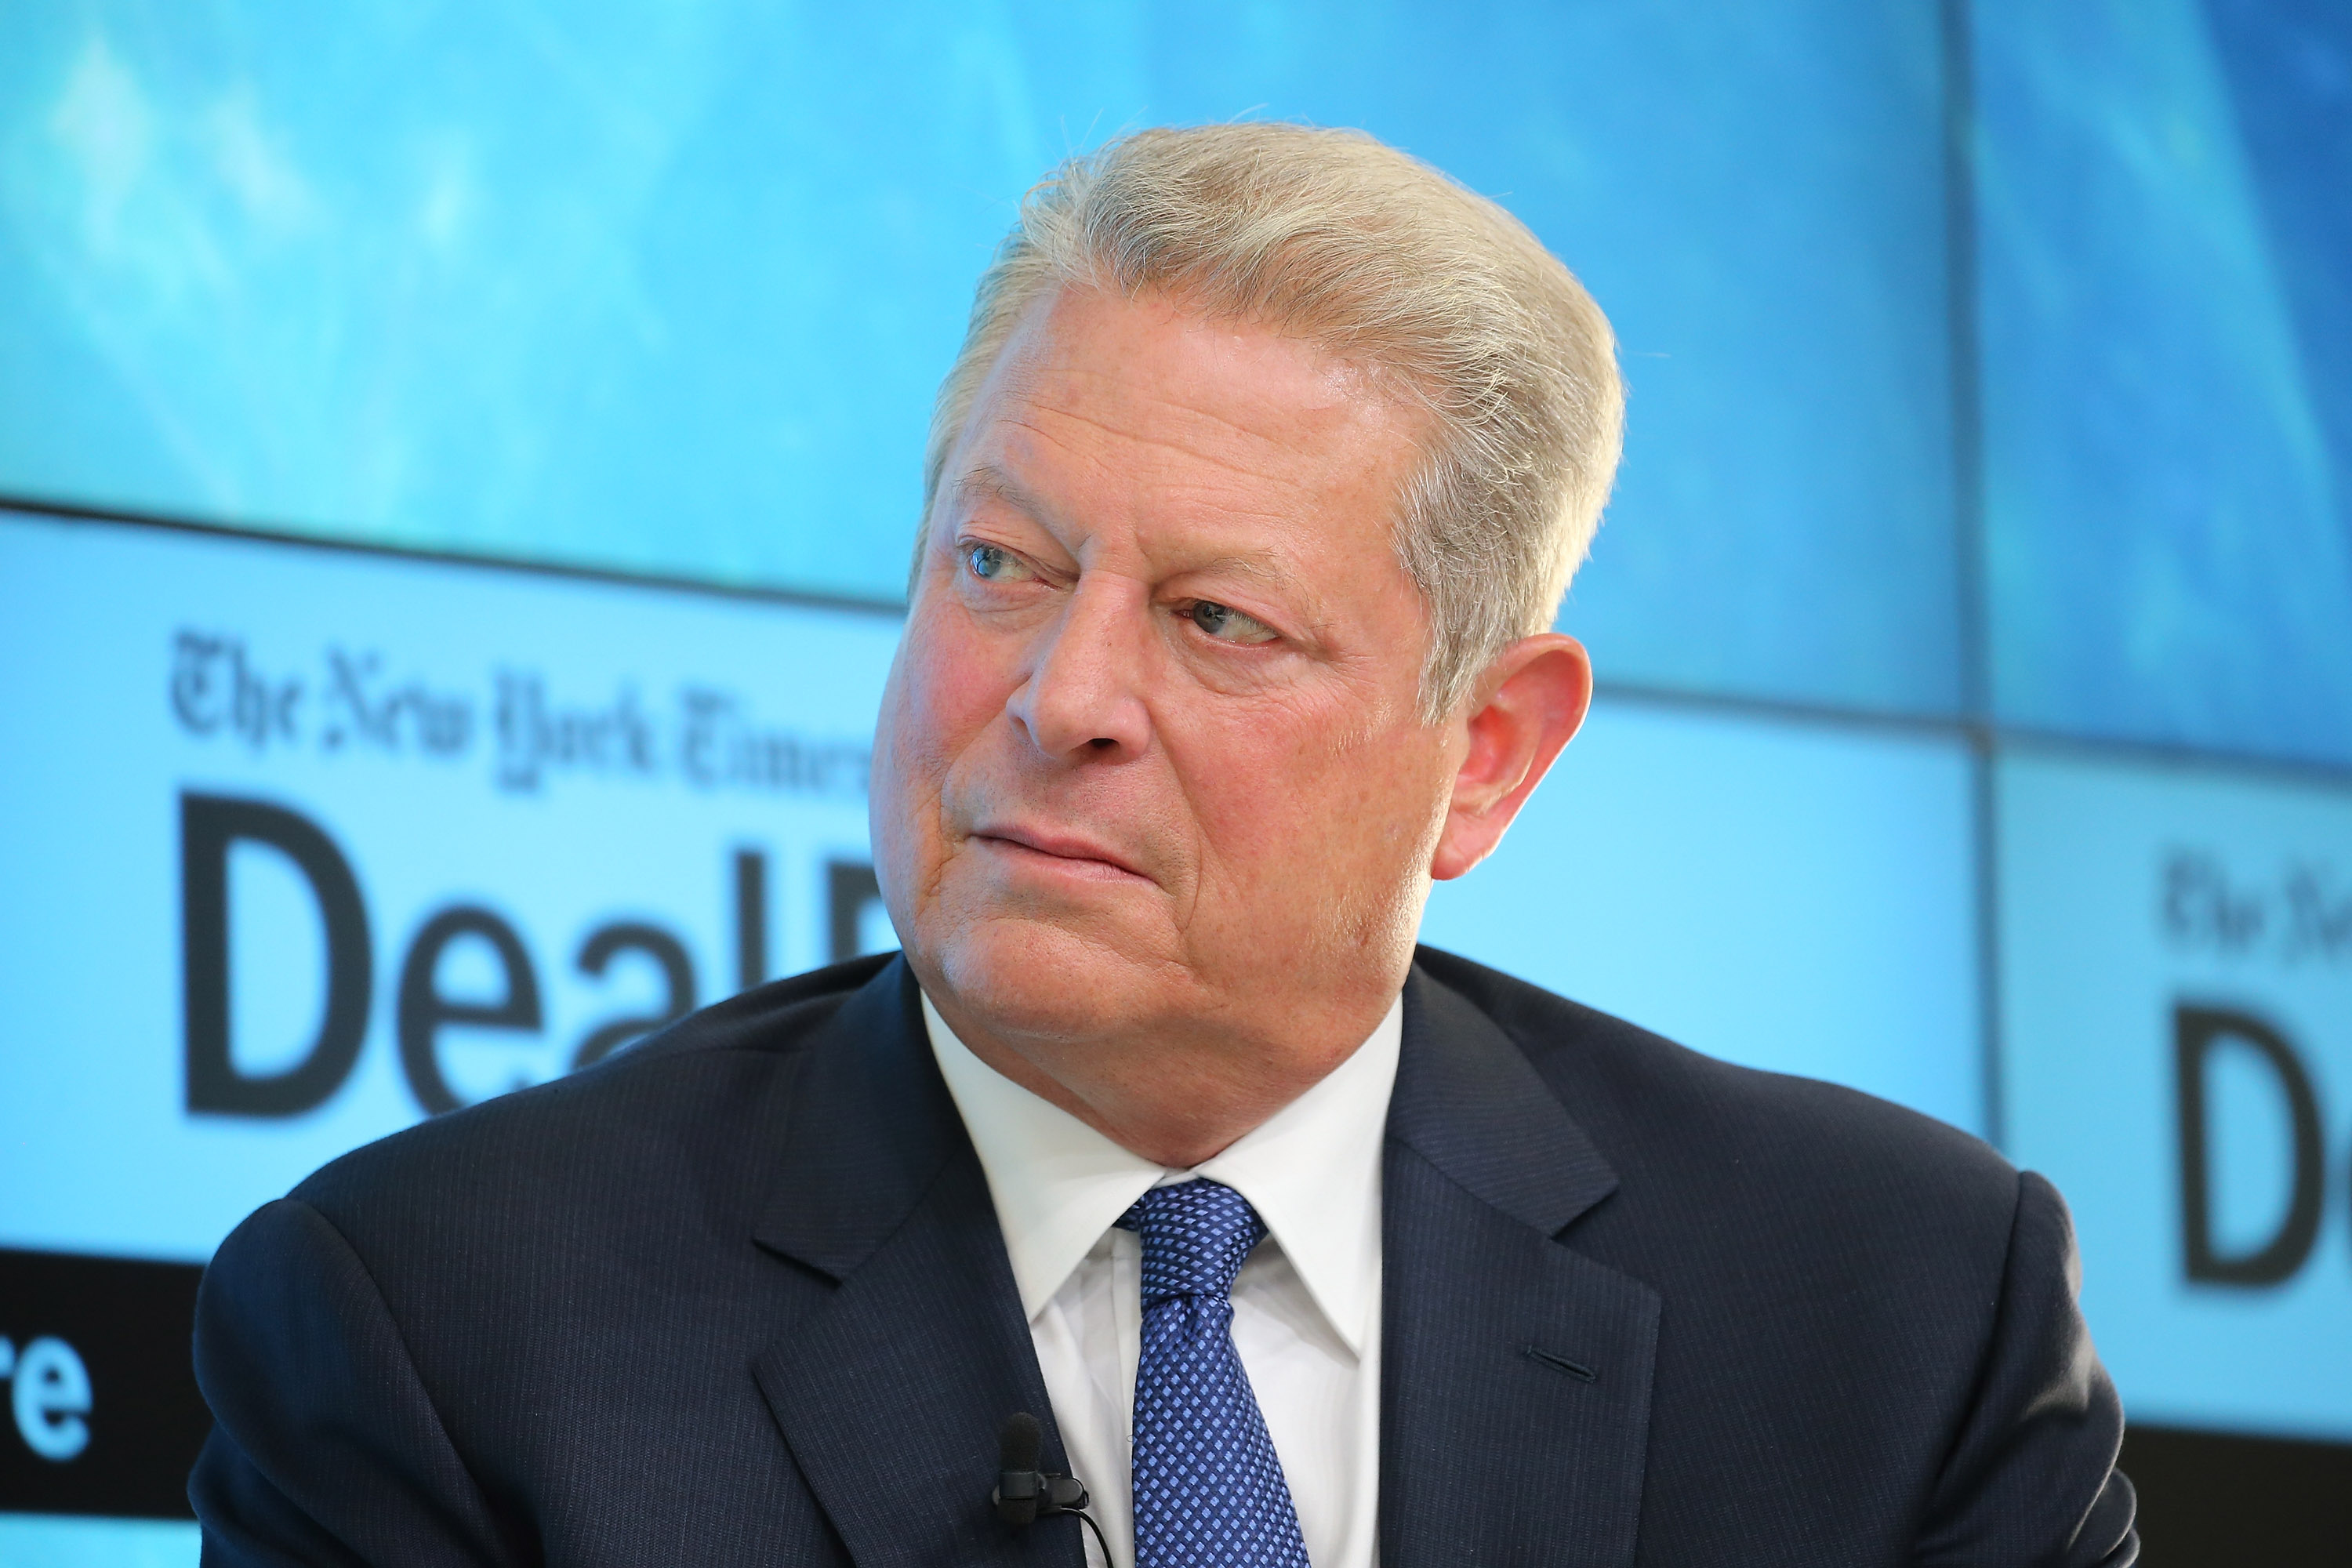 Former Vice President Al Gore, chairman of Generation Investment Management and chairman of The Climate Reality Project, participates in a panel discussion at the New York Times 2015 DealBook Conference at the Whitney Museum of American Art on November 3, 2015 in New York City.  (Neilson Barnard/Getty Images-- New York Times) (Neilson Barnard&mdash;2015 Getty Images)